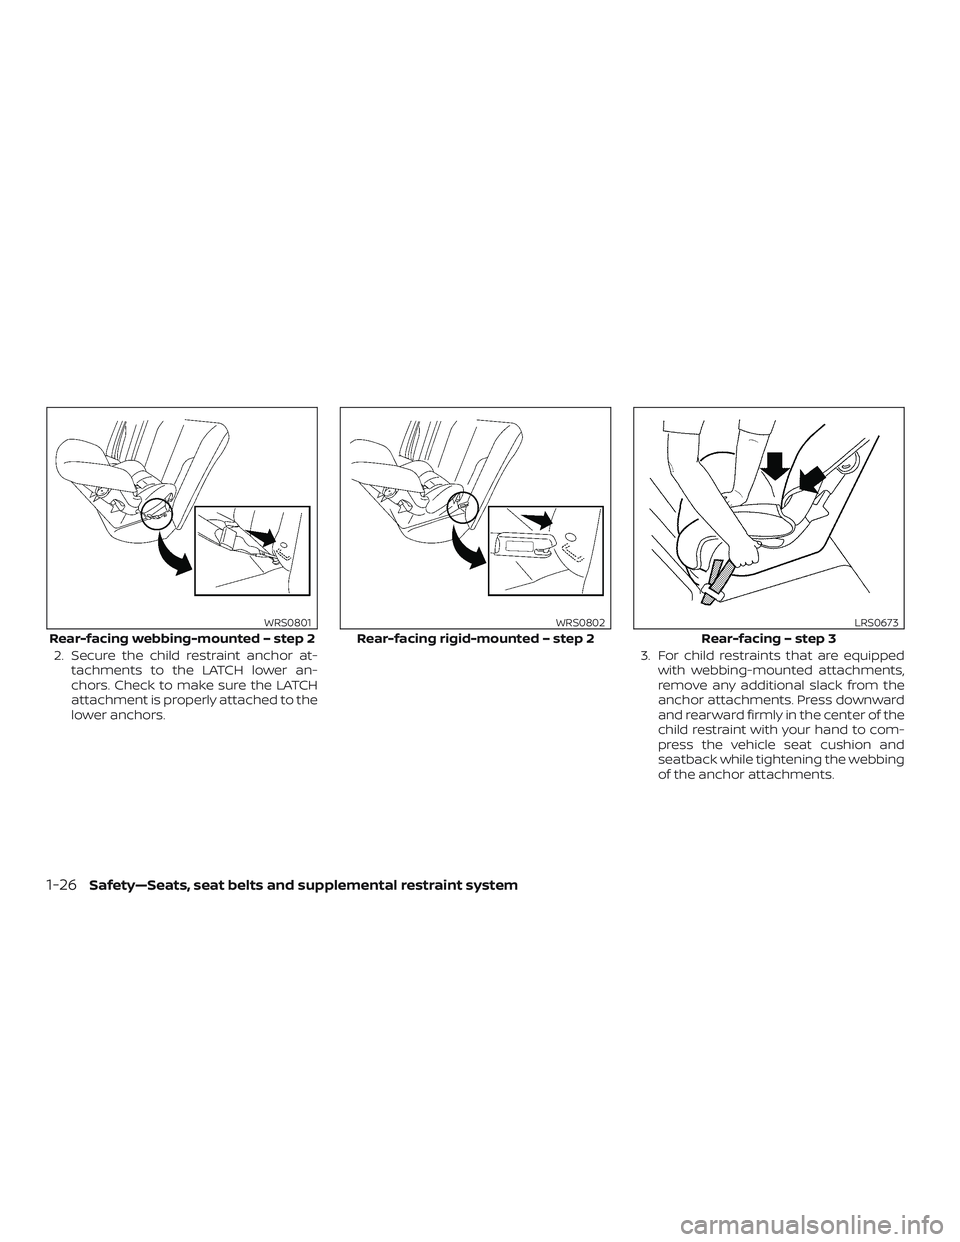 NISSAN VERSA 2018 Service Manual 2. Secure the child restraint anchor at-
tachments to the LATCH lower an-
chors. Check to make sure the LATCH
attachment is properly attached to the
lower anchors.3. For child restraints that are equi